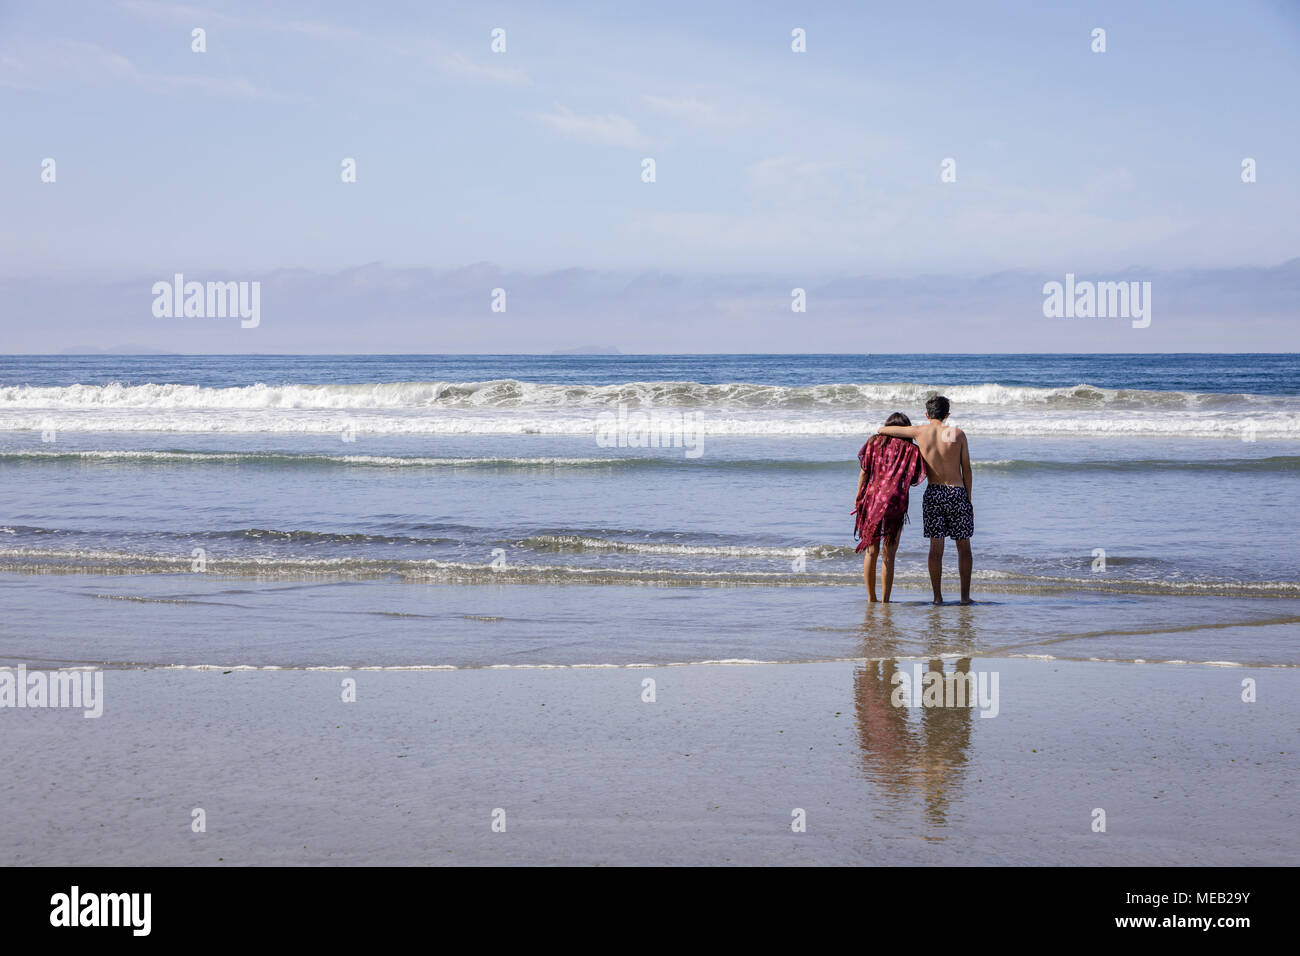 Carefree young couple spending time together of a beach. Stock Photo